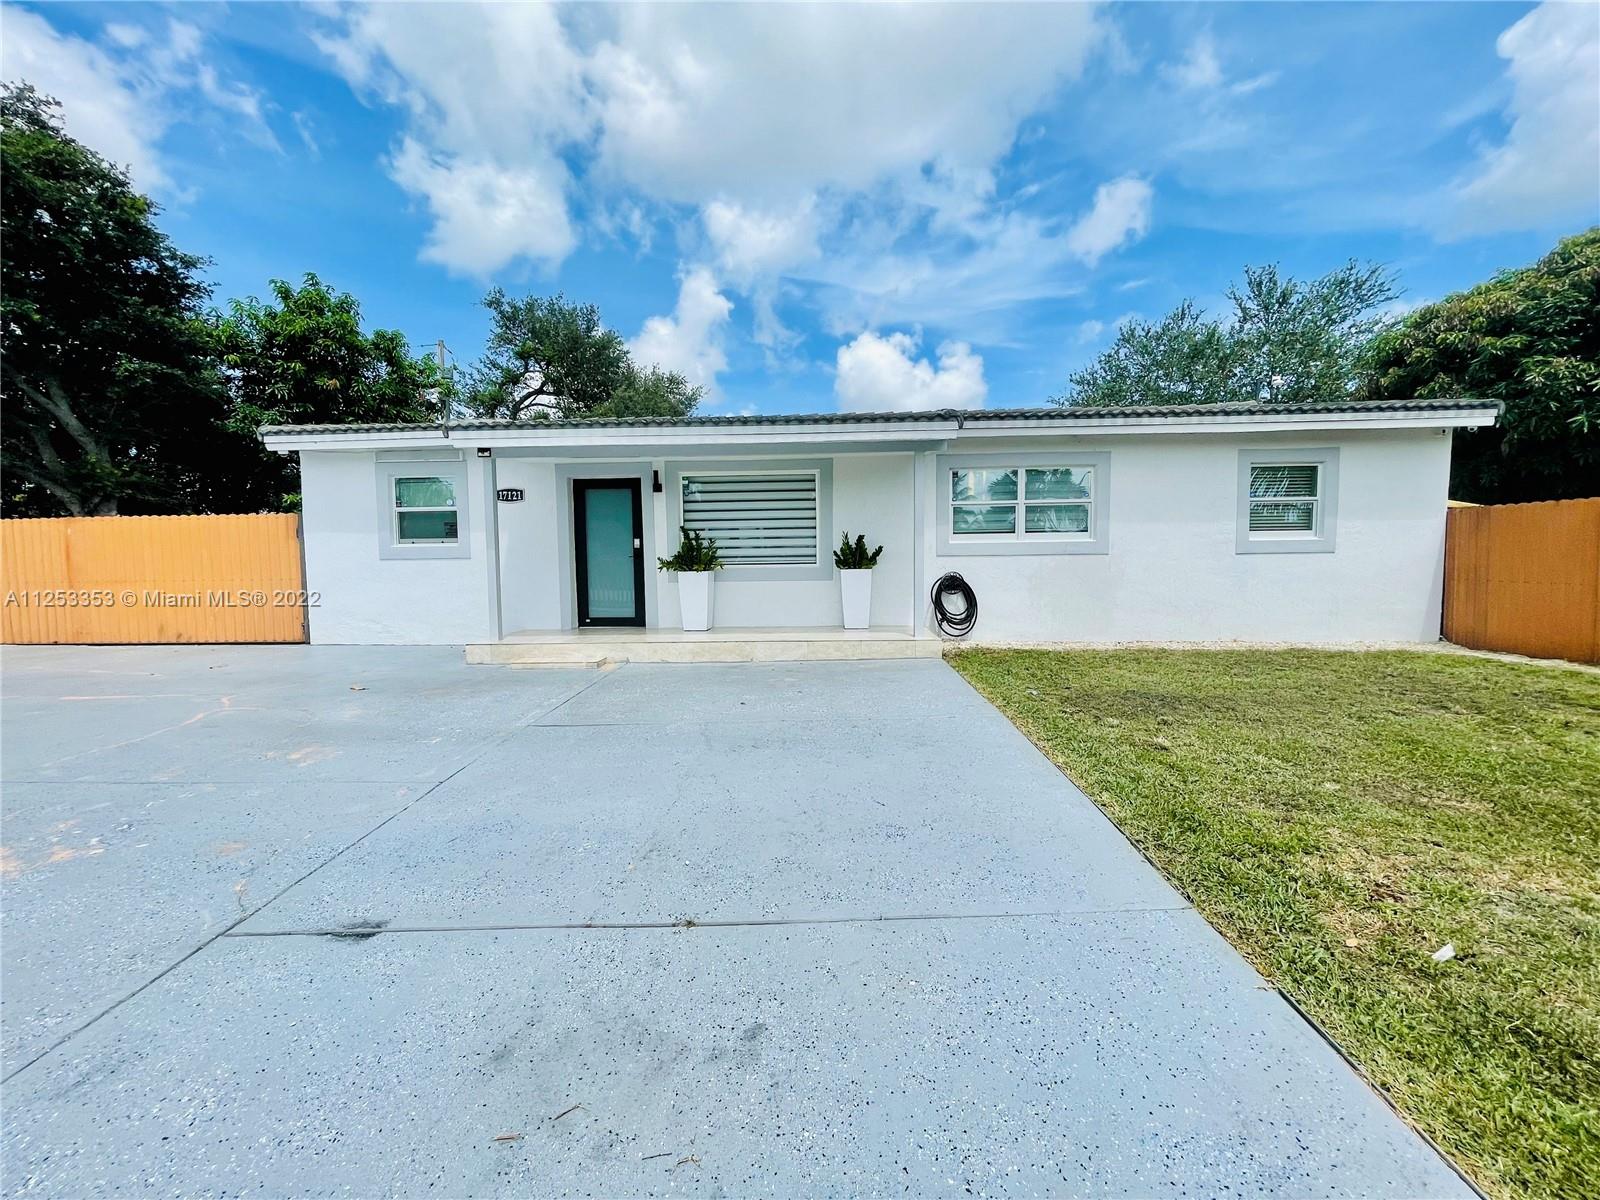 Photo 1 of 17121 36th Ave in Miami Gardens - MLS A11253353